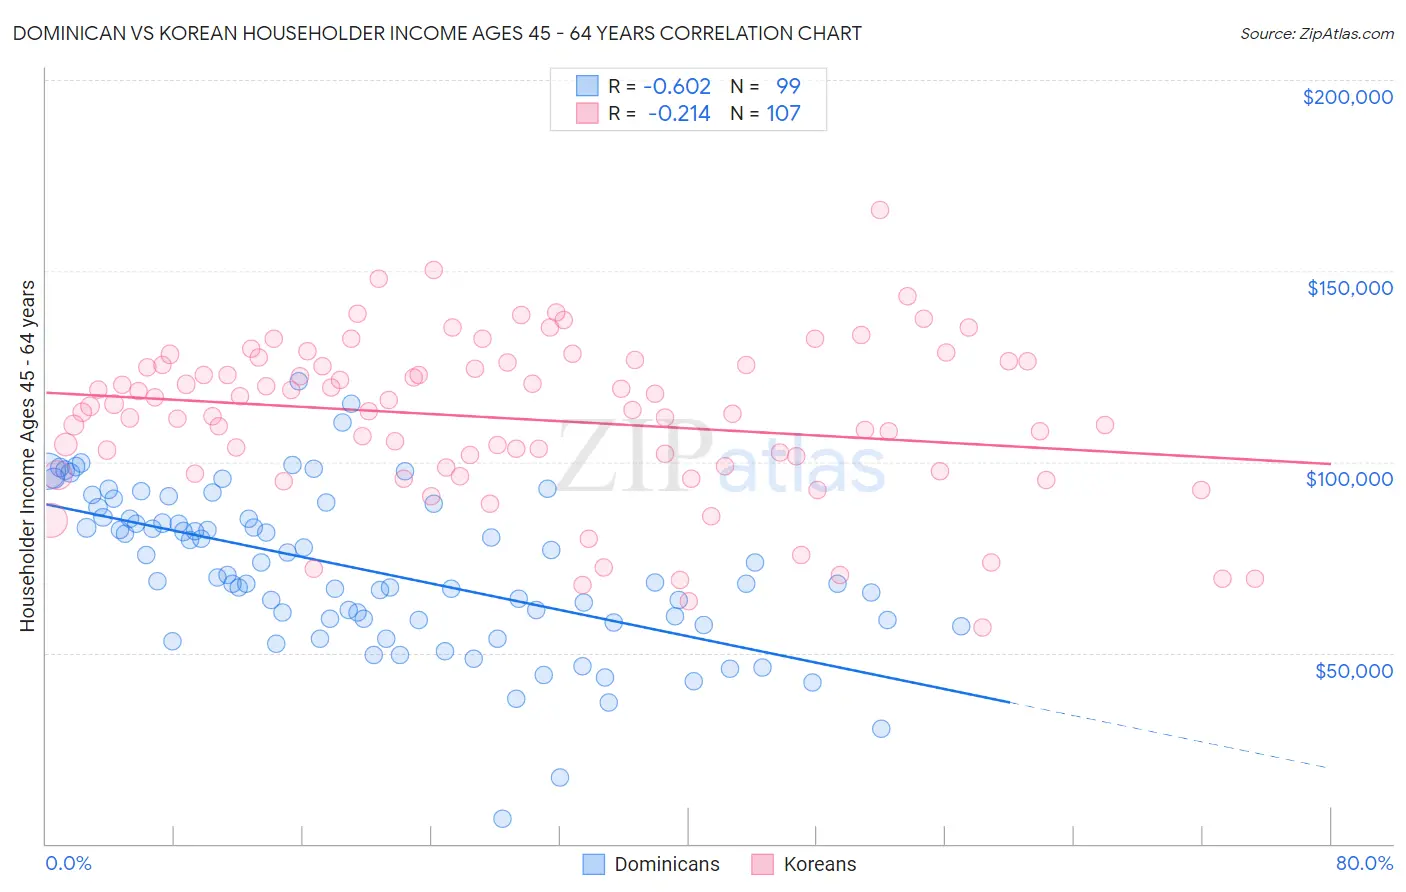 Dominican vs Korean Householder Income Ages 45 - 64 years